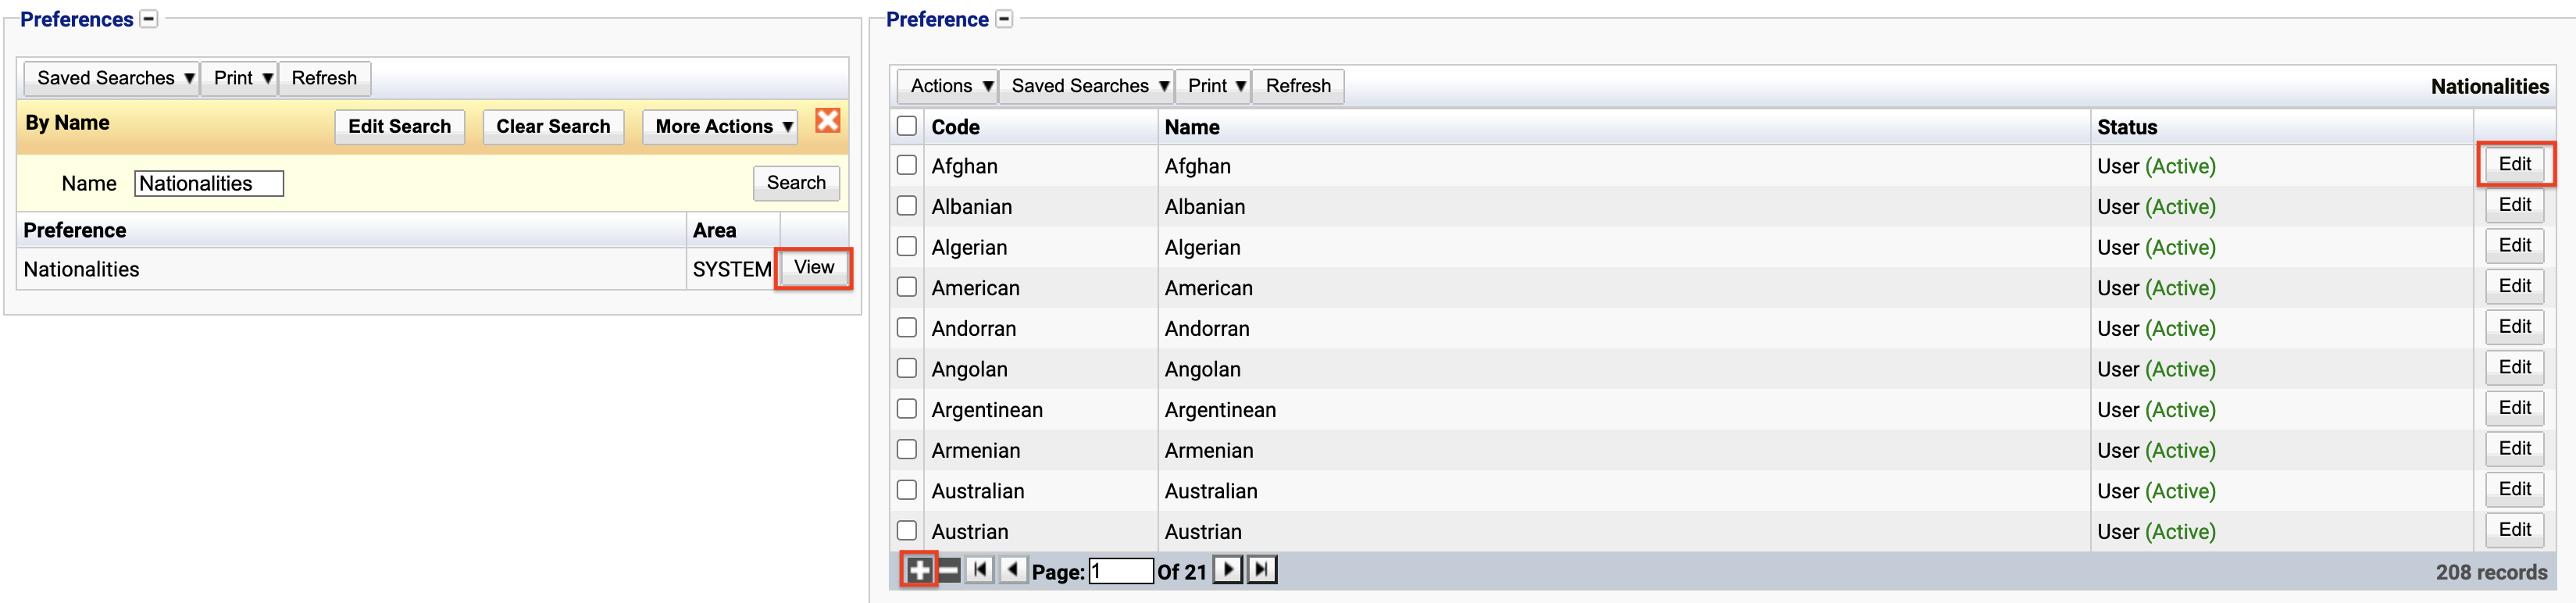 Finding the nationalities preference in the preference list.